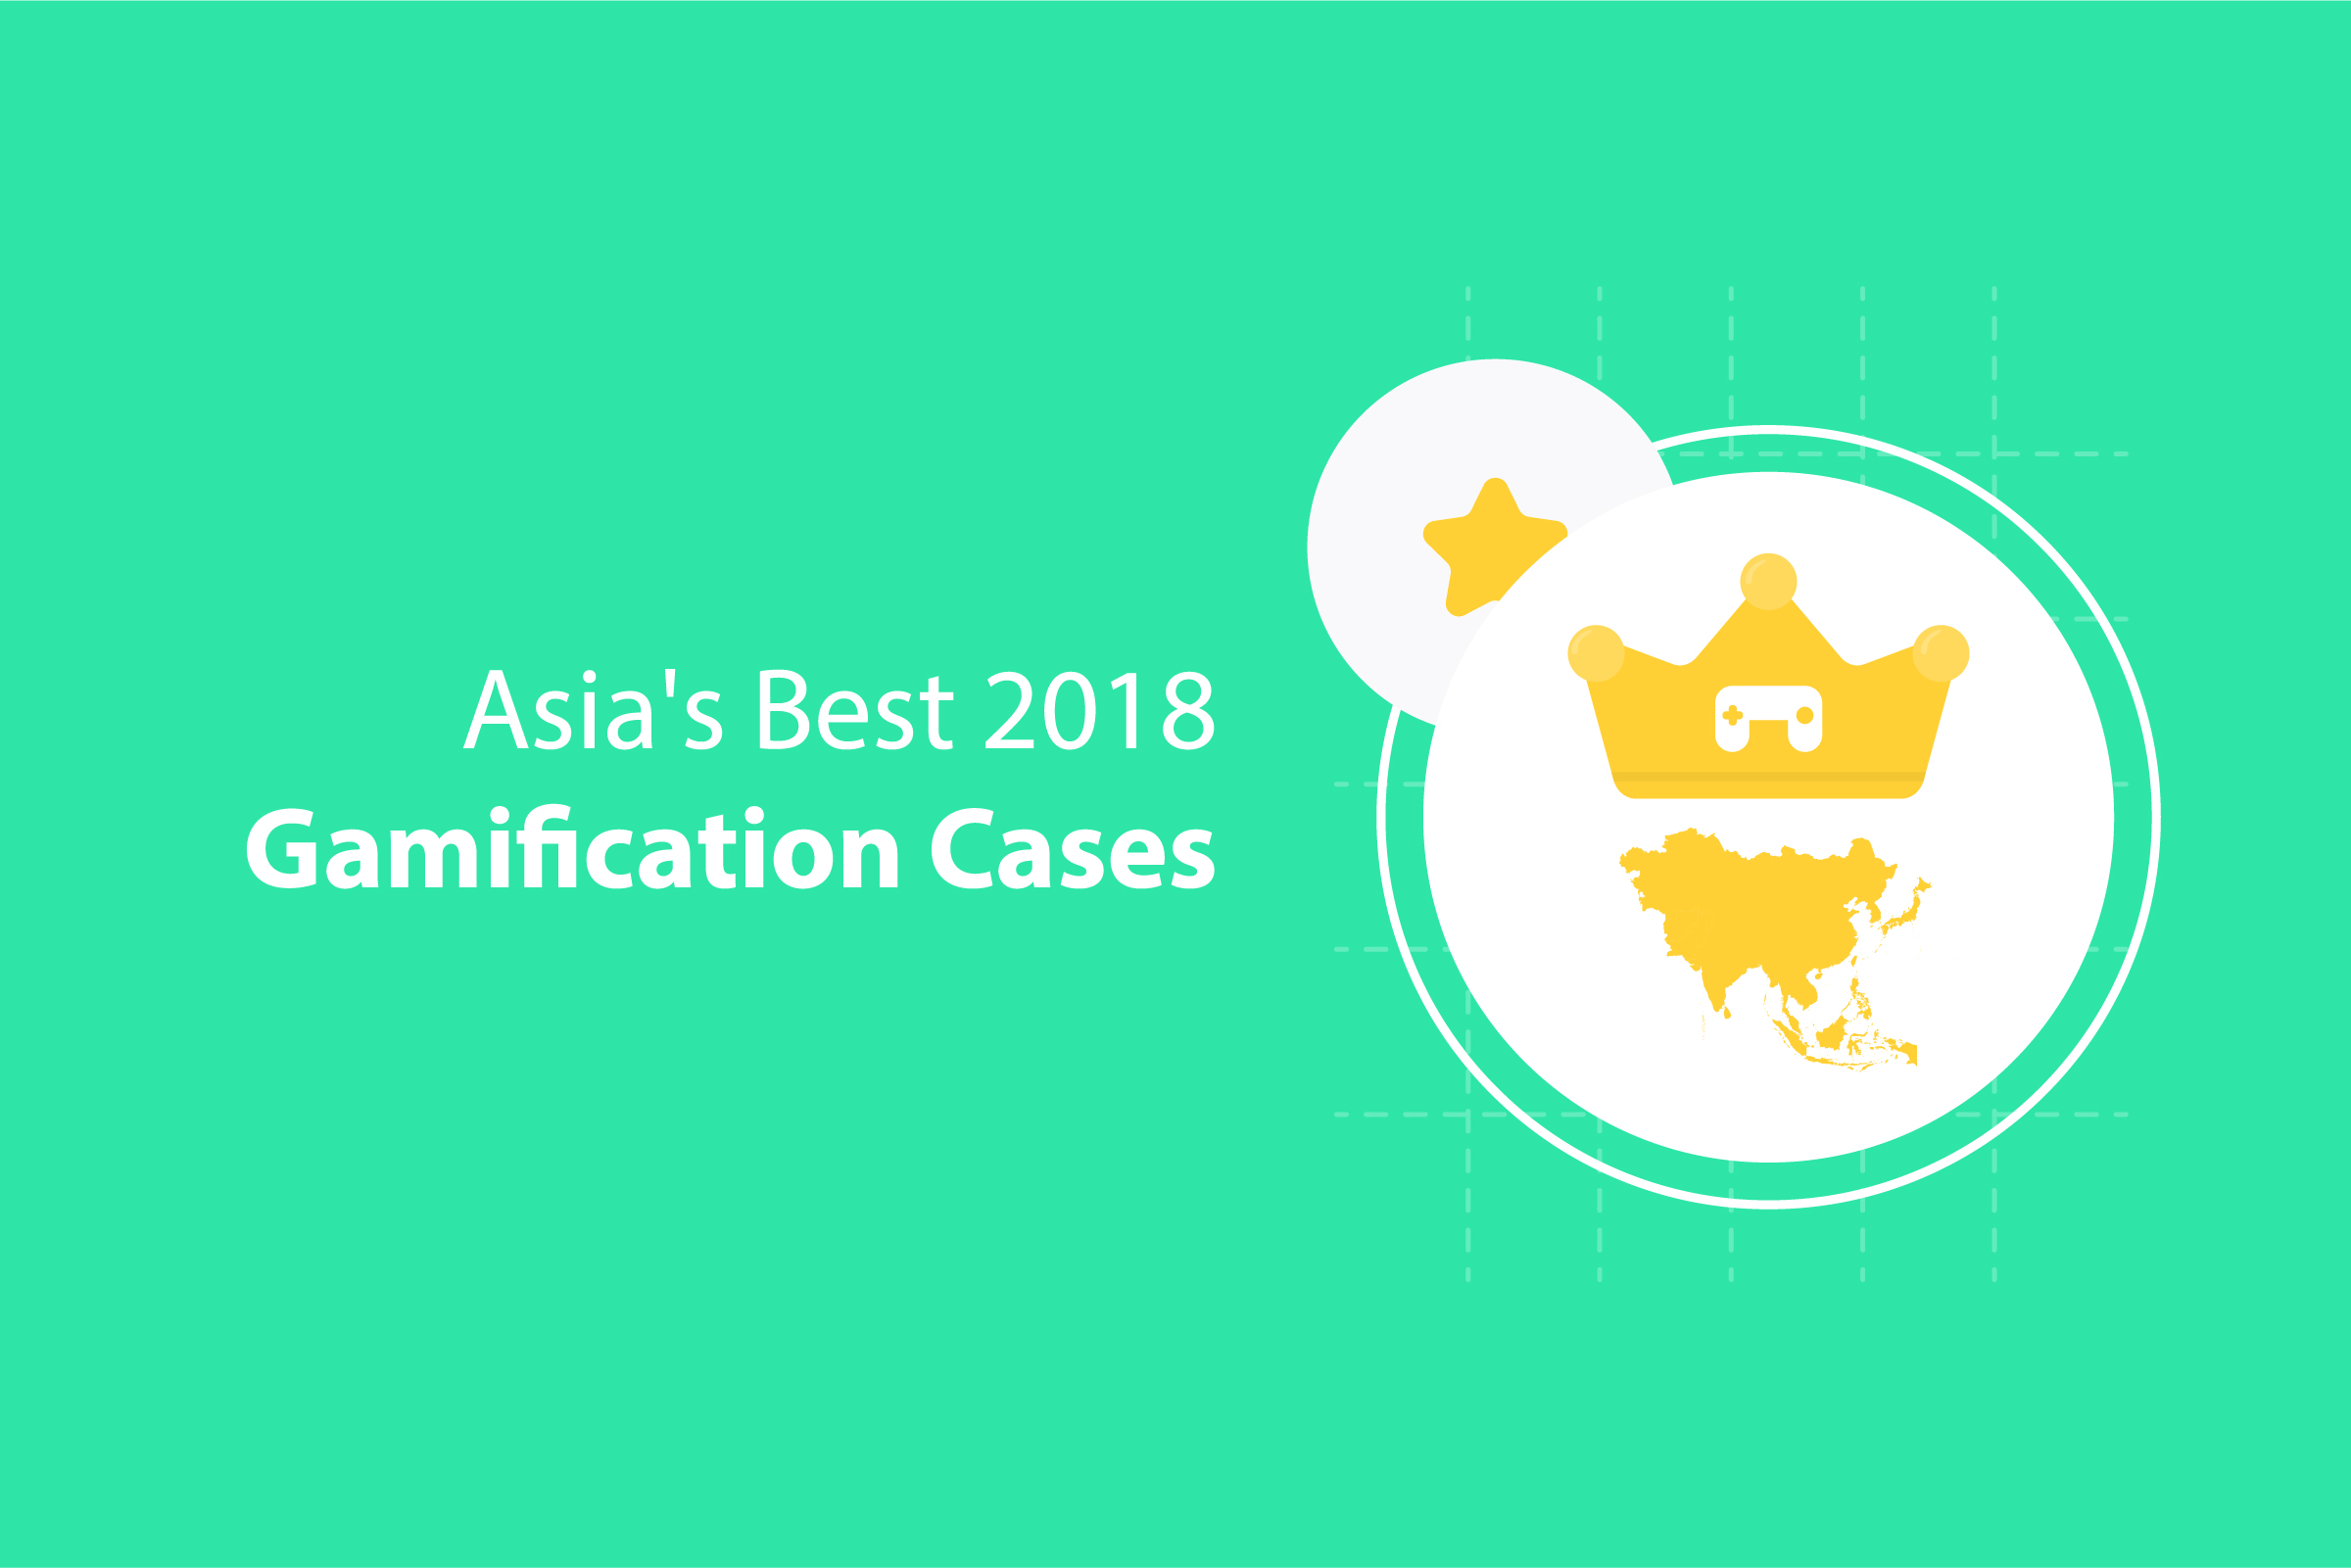 Top Gamification Usage in Asia